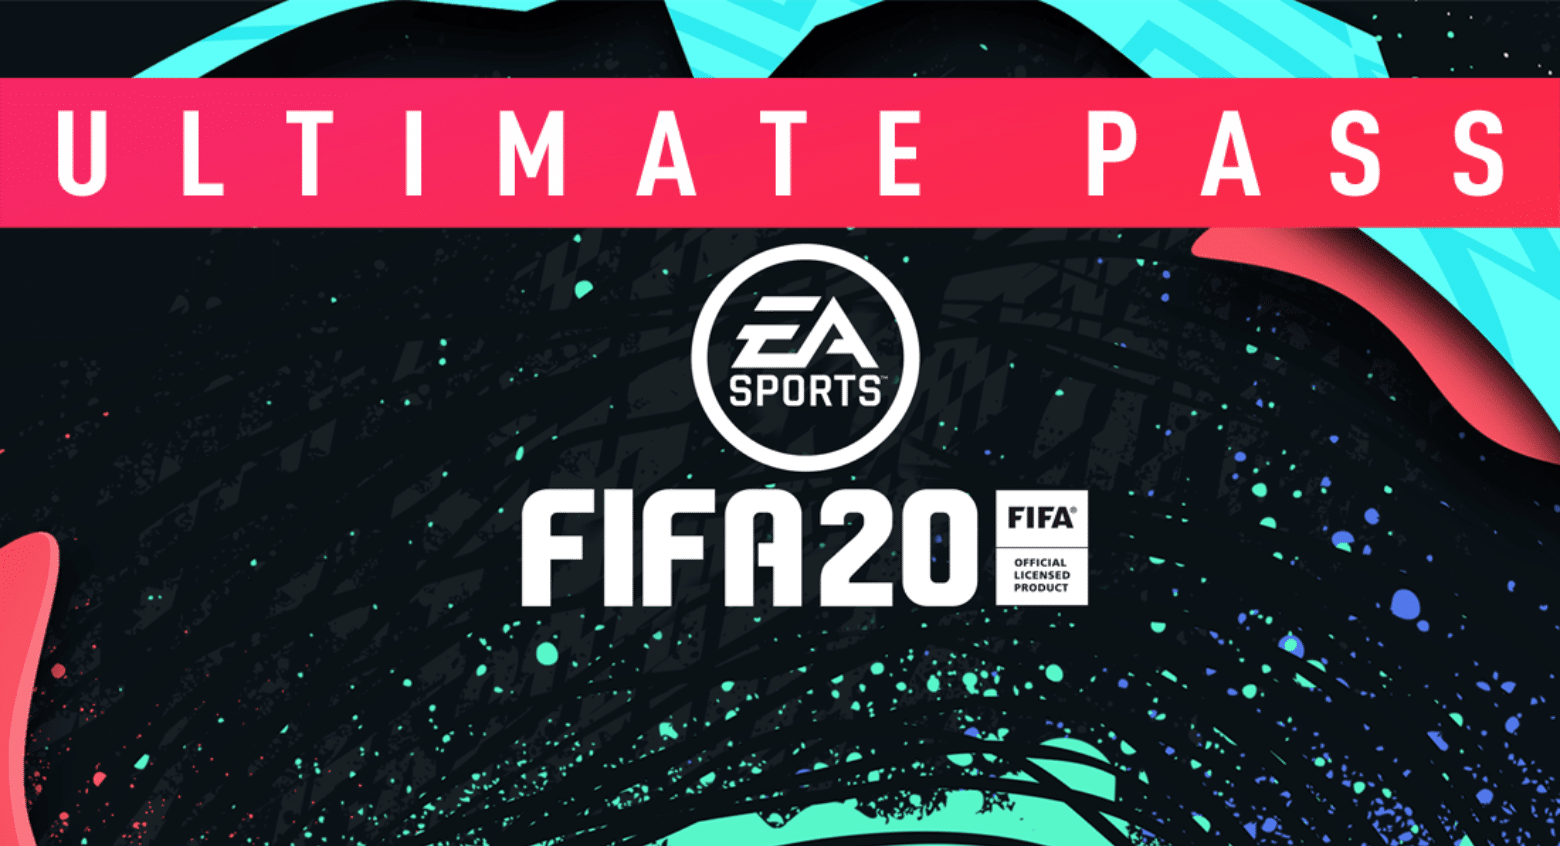 Ultimate Pass FIFA 20